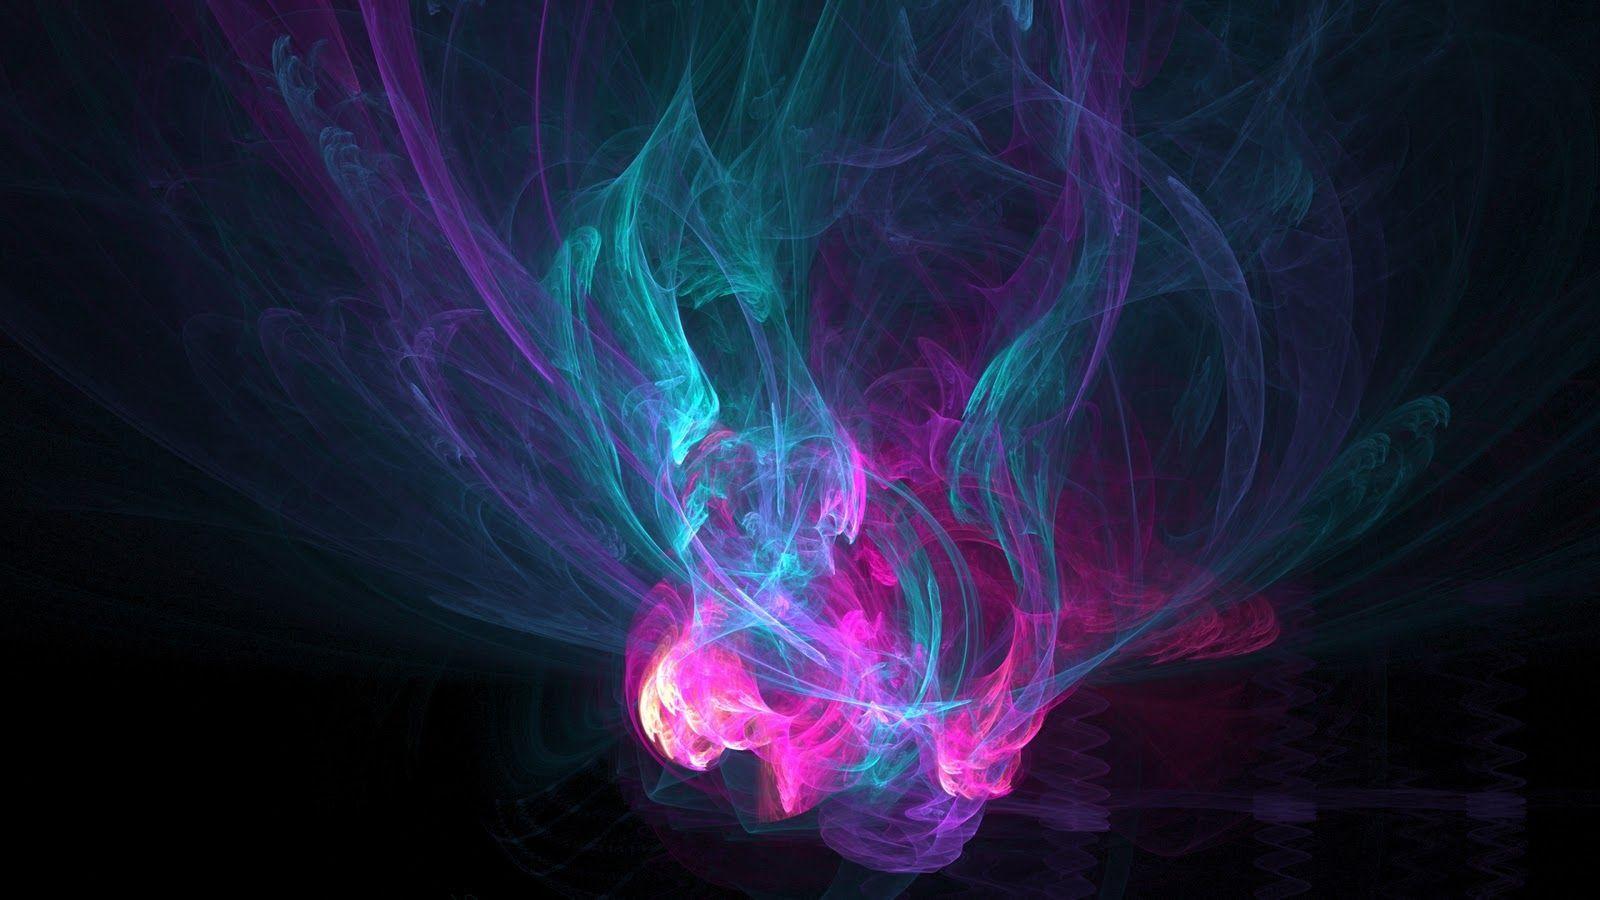 Abstract Fire Color Effect 2 Wallpaper. Abstract Graphic Wallpaper